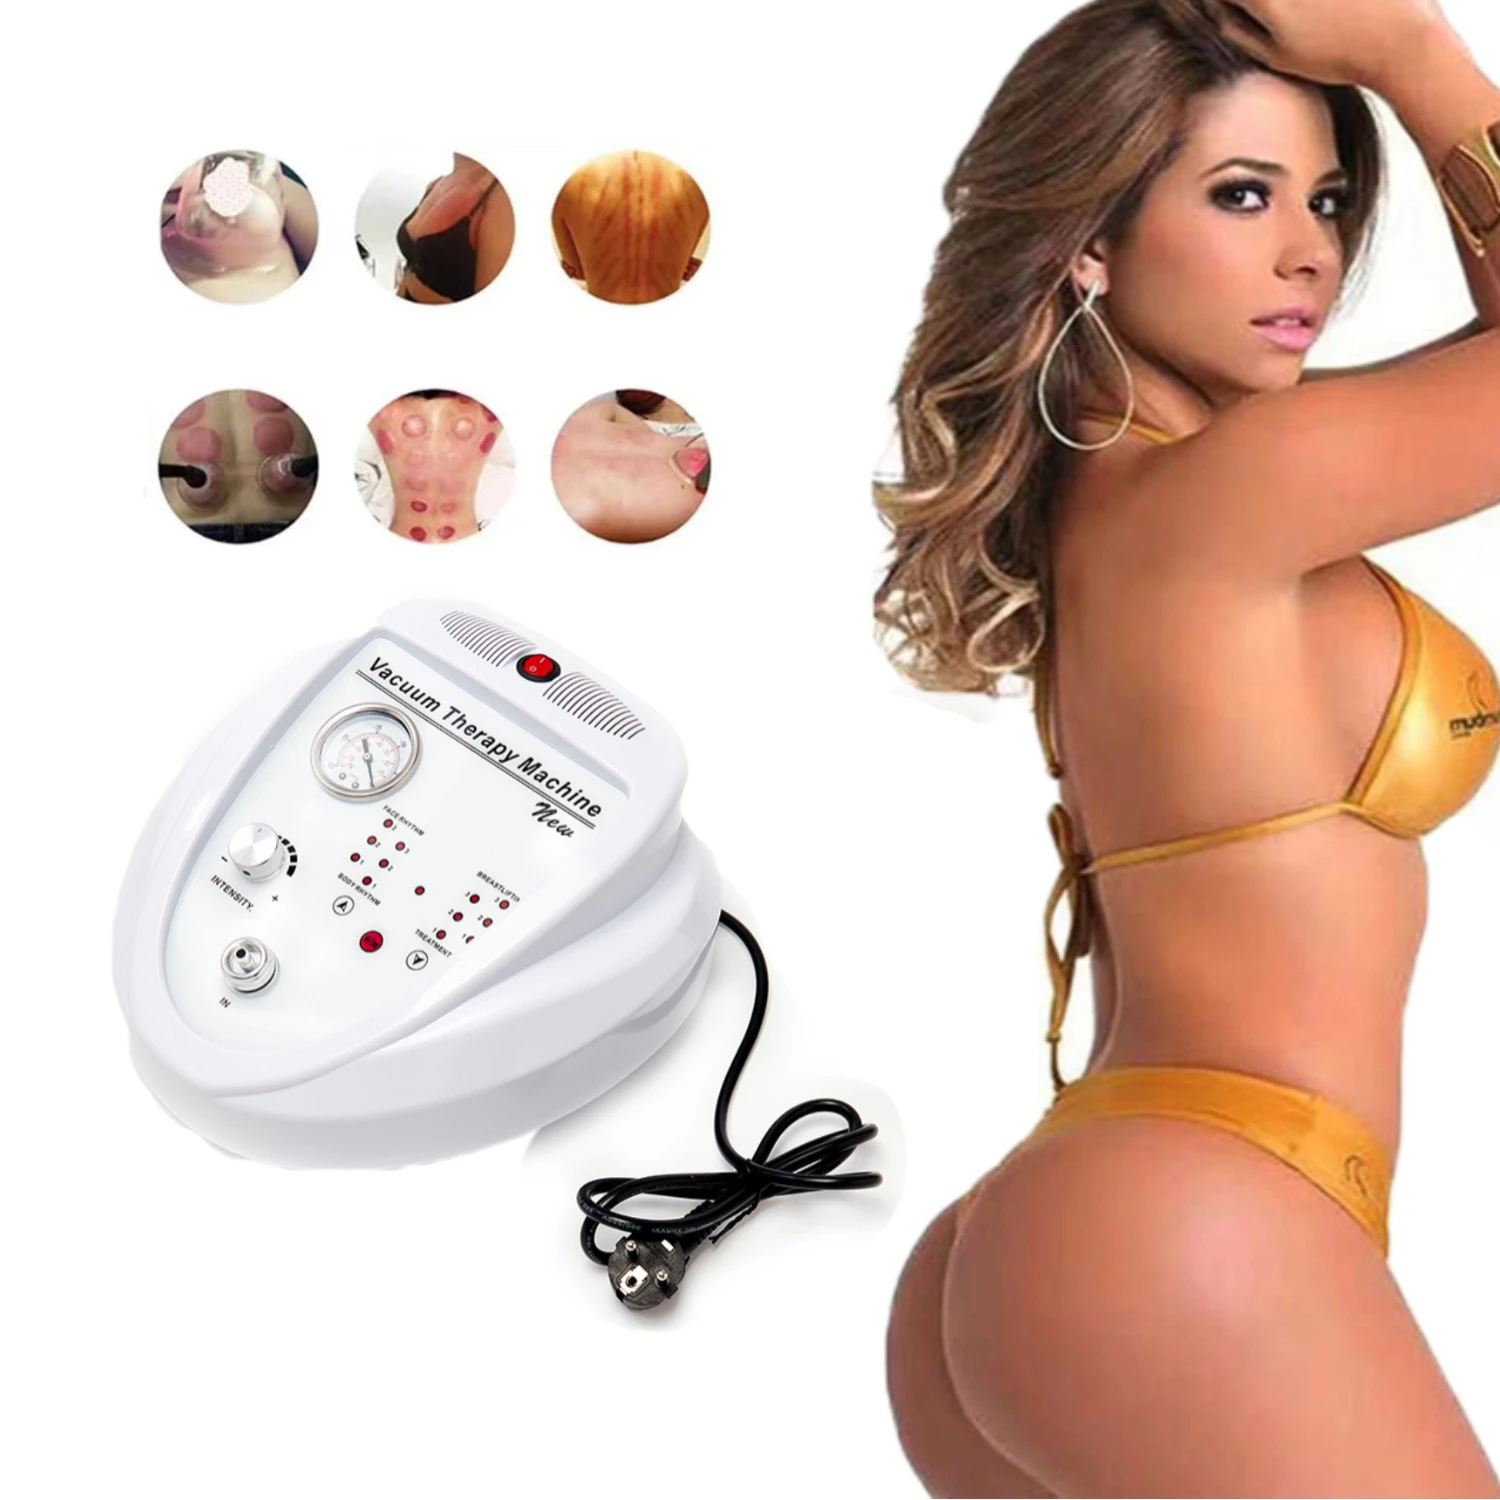 

2021 New Technology 12 models cellulite massage body slimming beauty salon use vacuum breast enlargement machine buttock, Blue cups